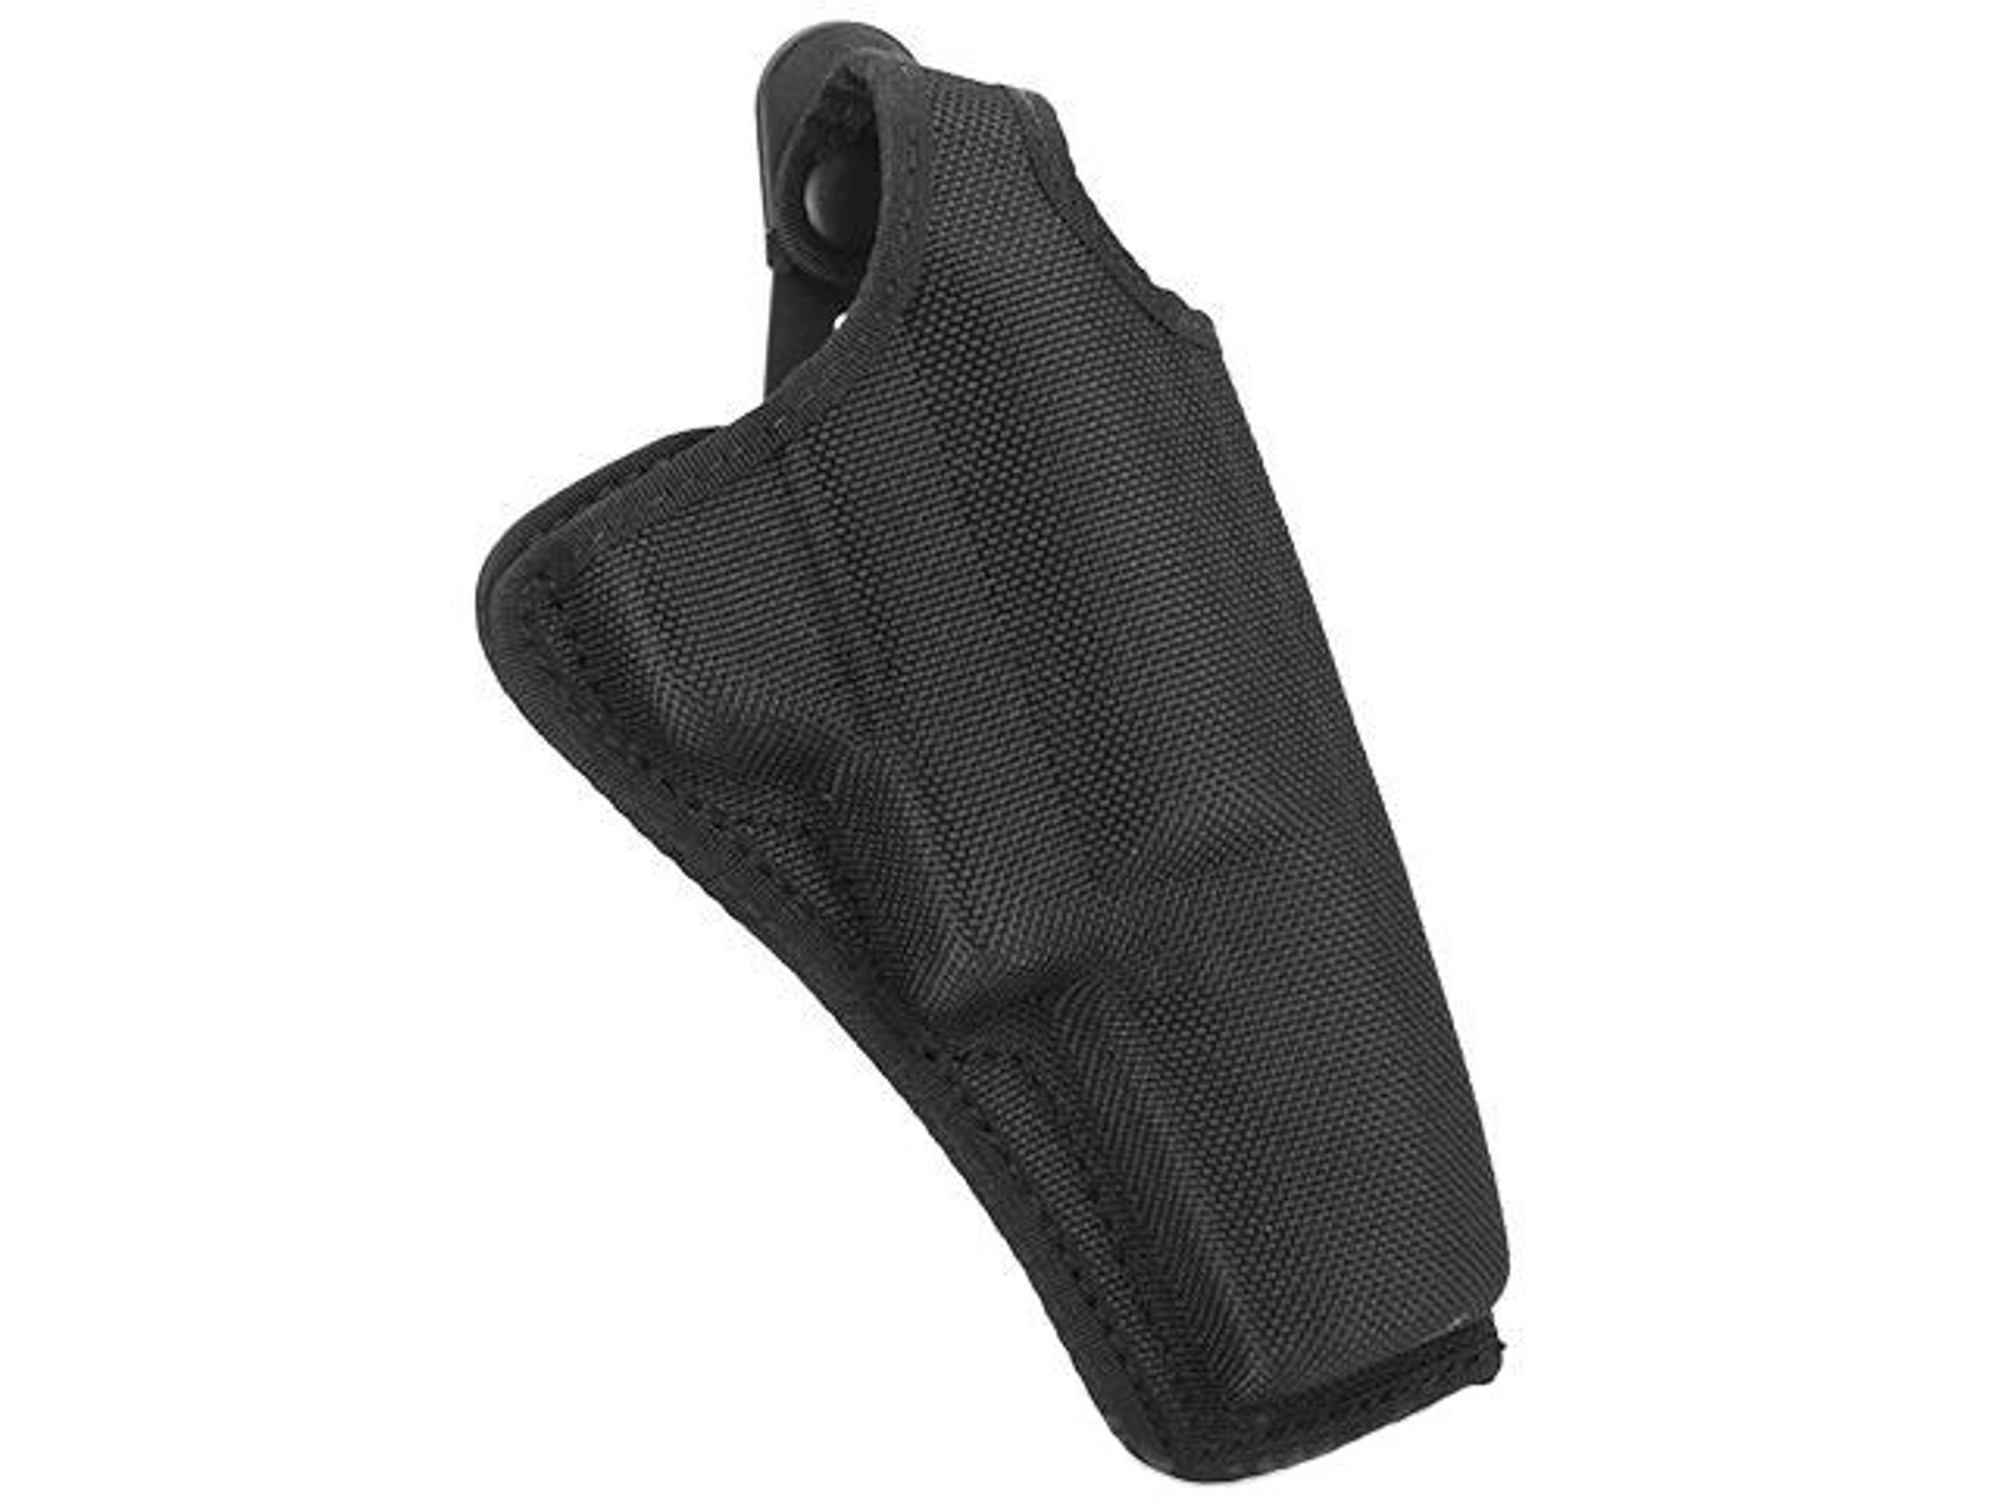 SAFARILAND / BIANCHI AccuMold Concealment Belt Clip Holster with Thumbsnap - Taurus Judge 2.5" (Right)